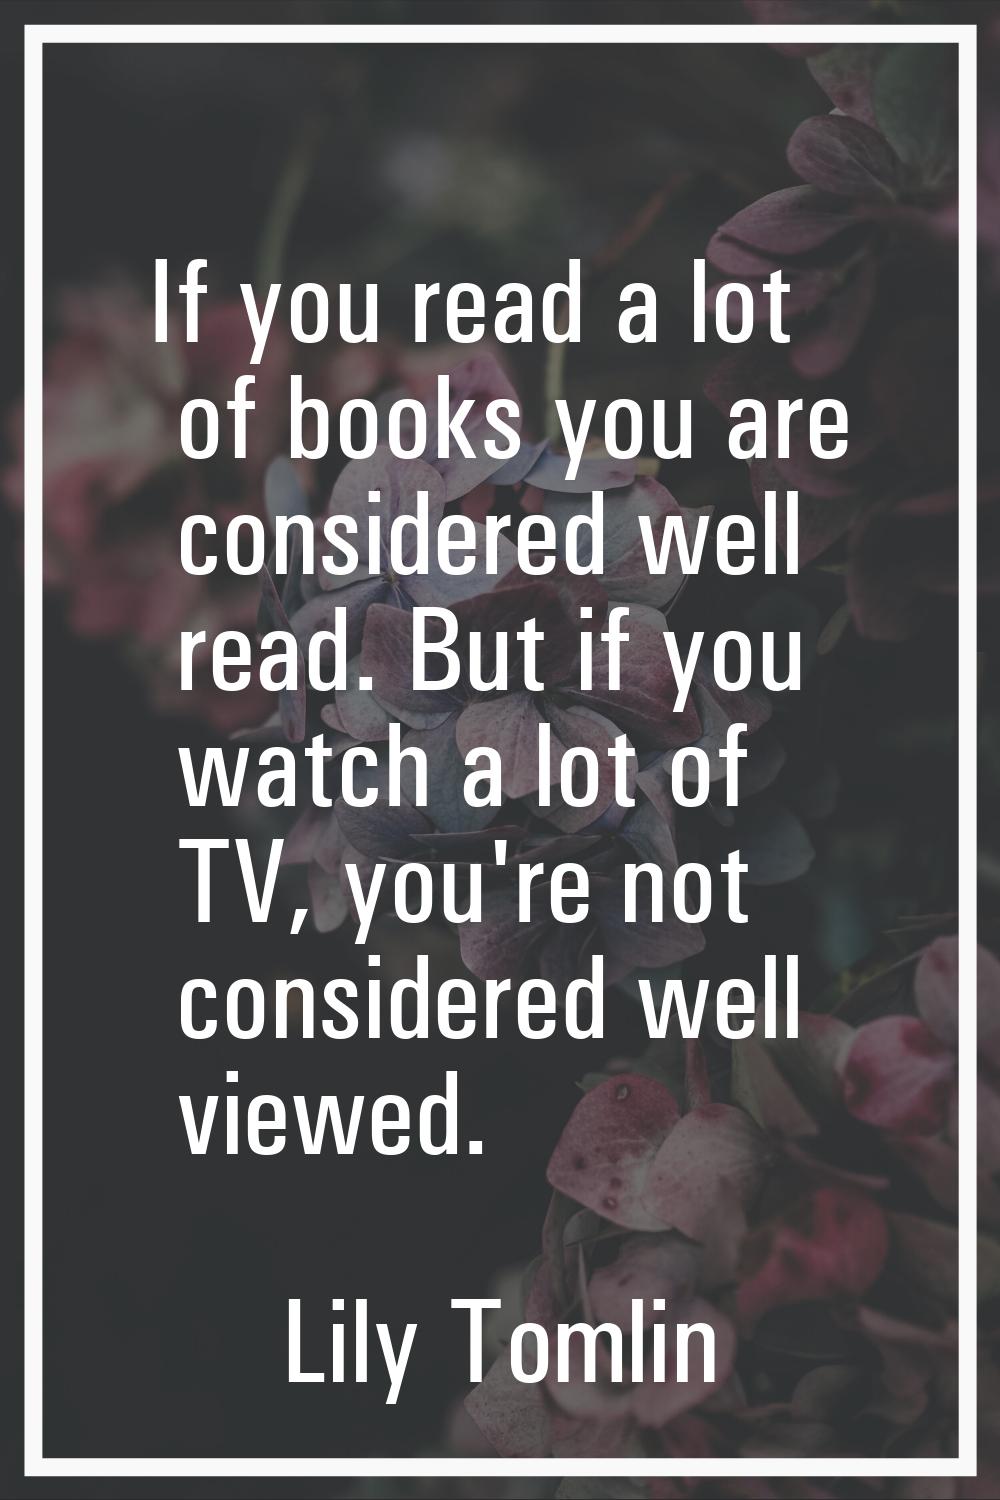 If you read a lot of books you are considered well read. But if you watch a lot of TV, you're not c